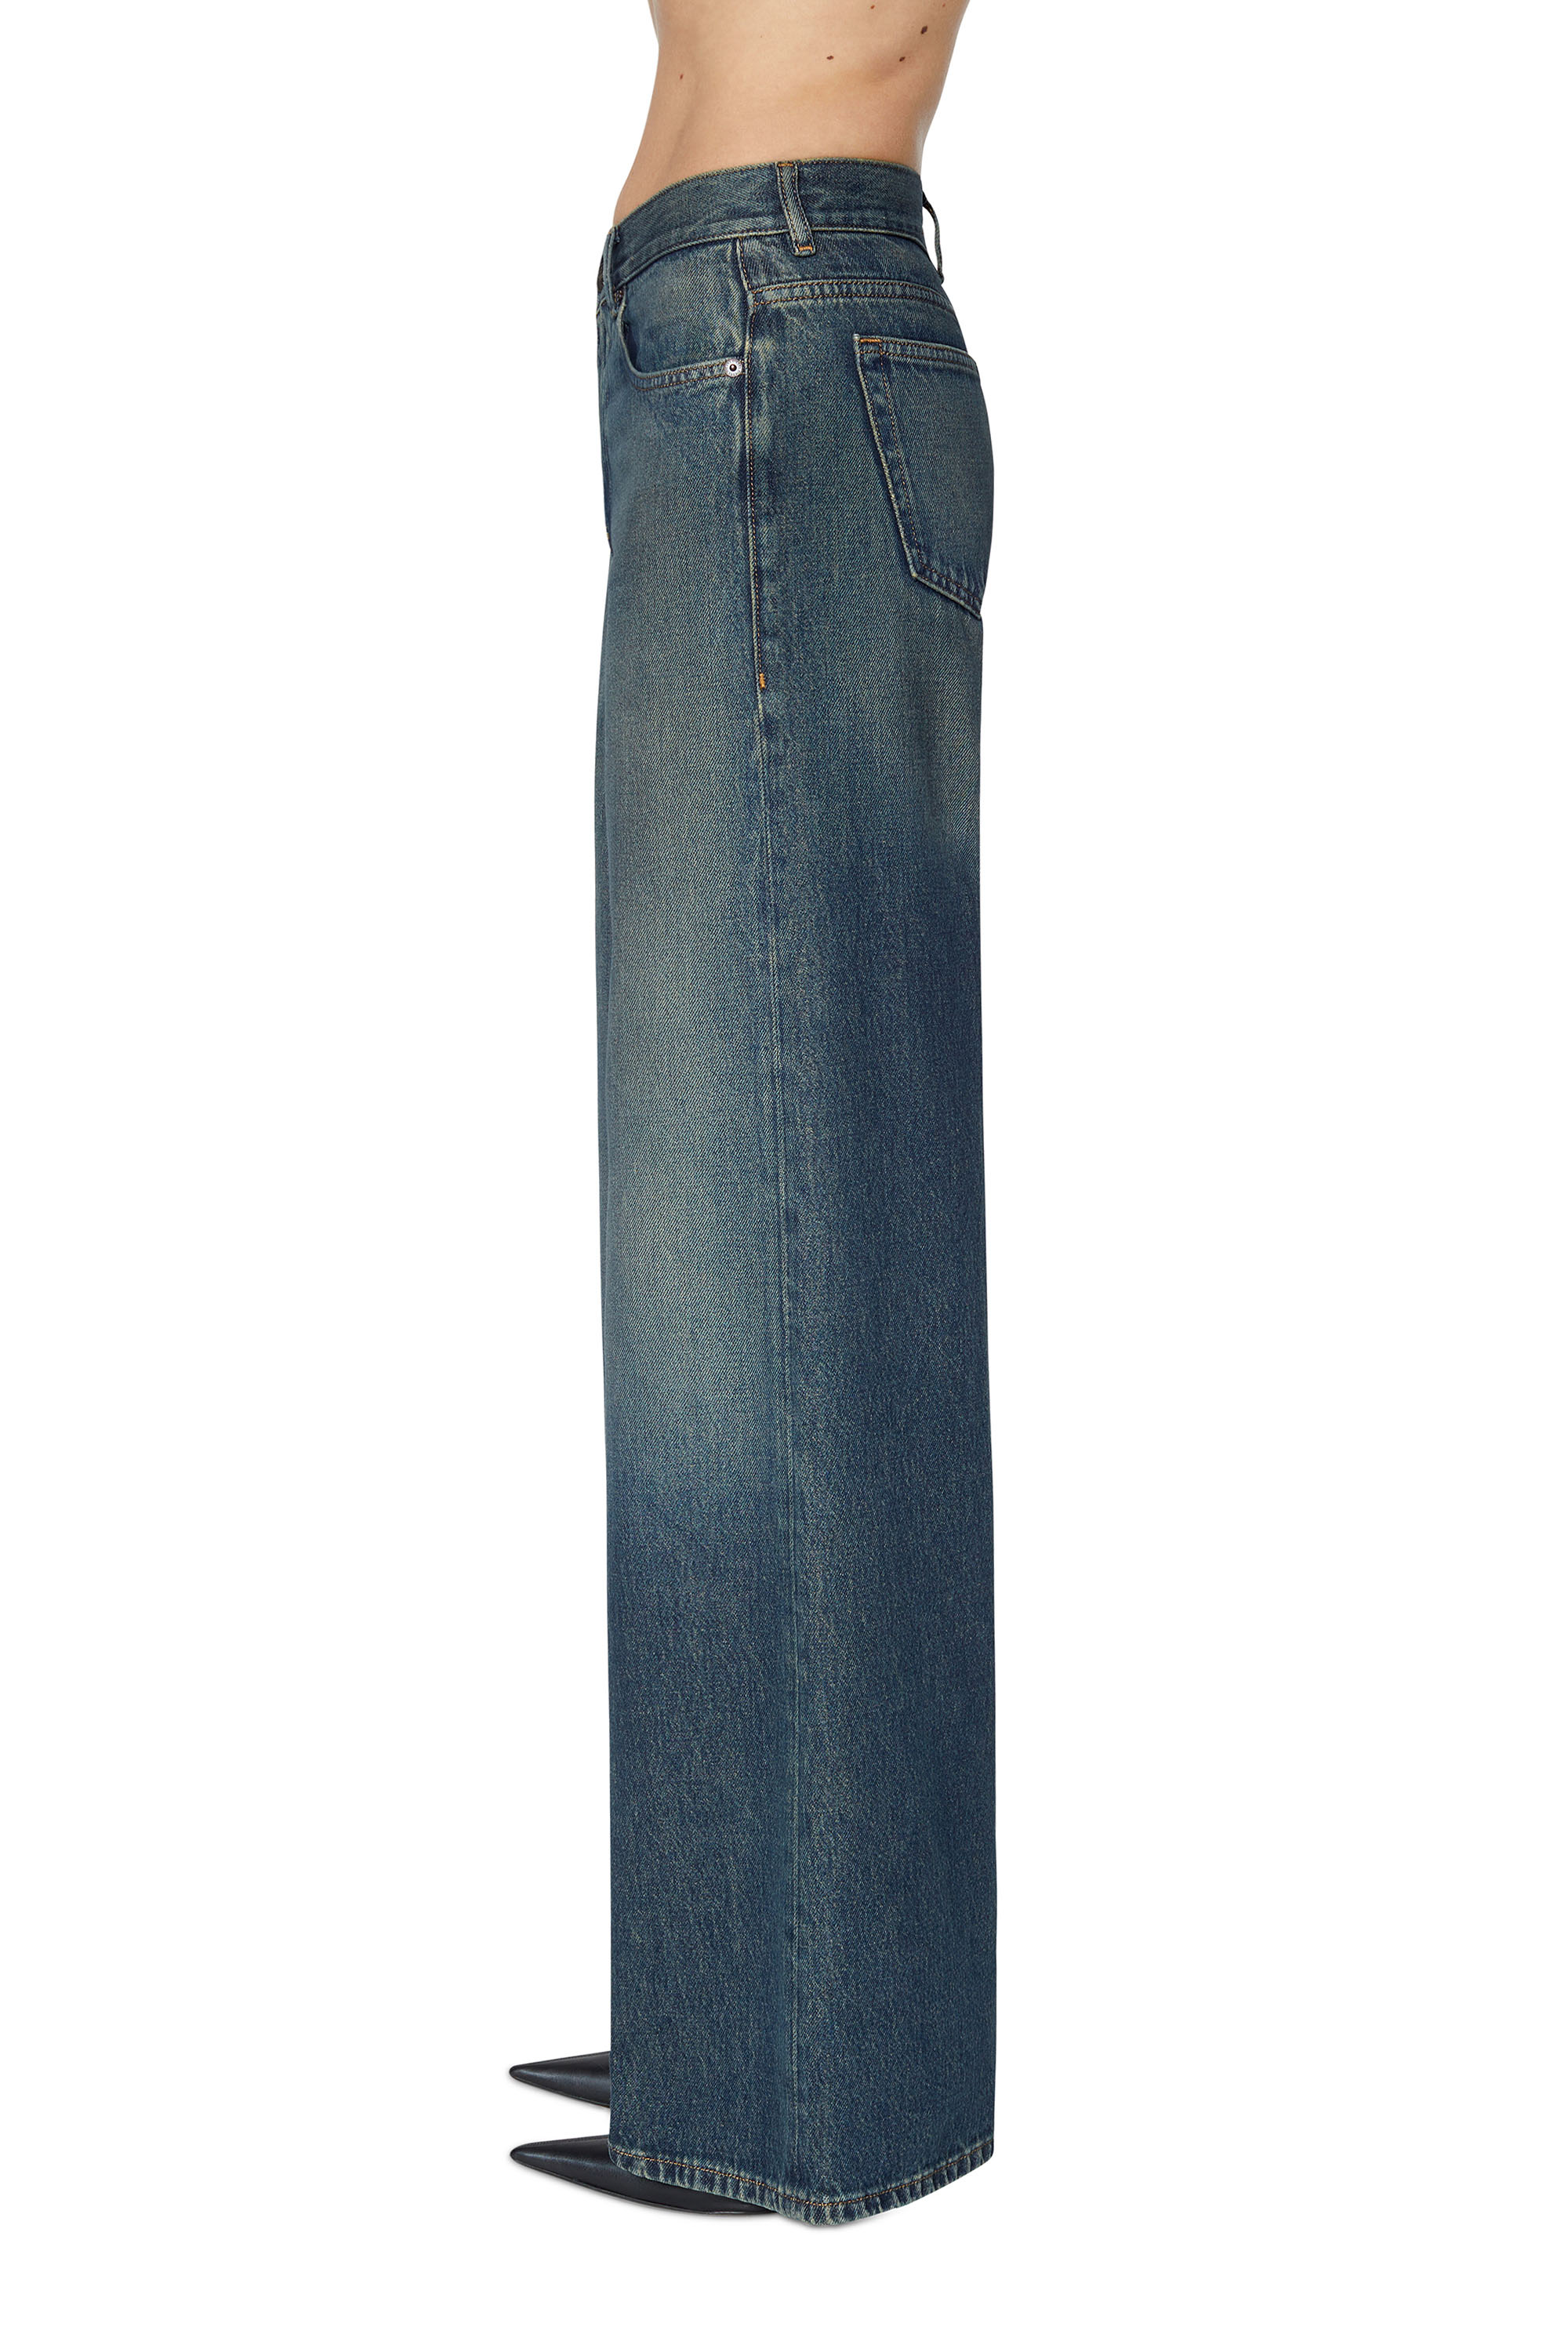 Diesel - 1978 09C04 Bootcut and Flare Jeans,  - Image 4